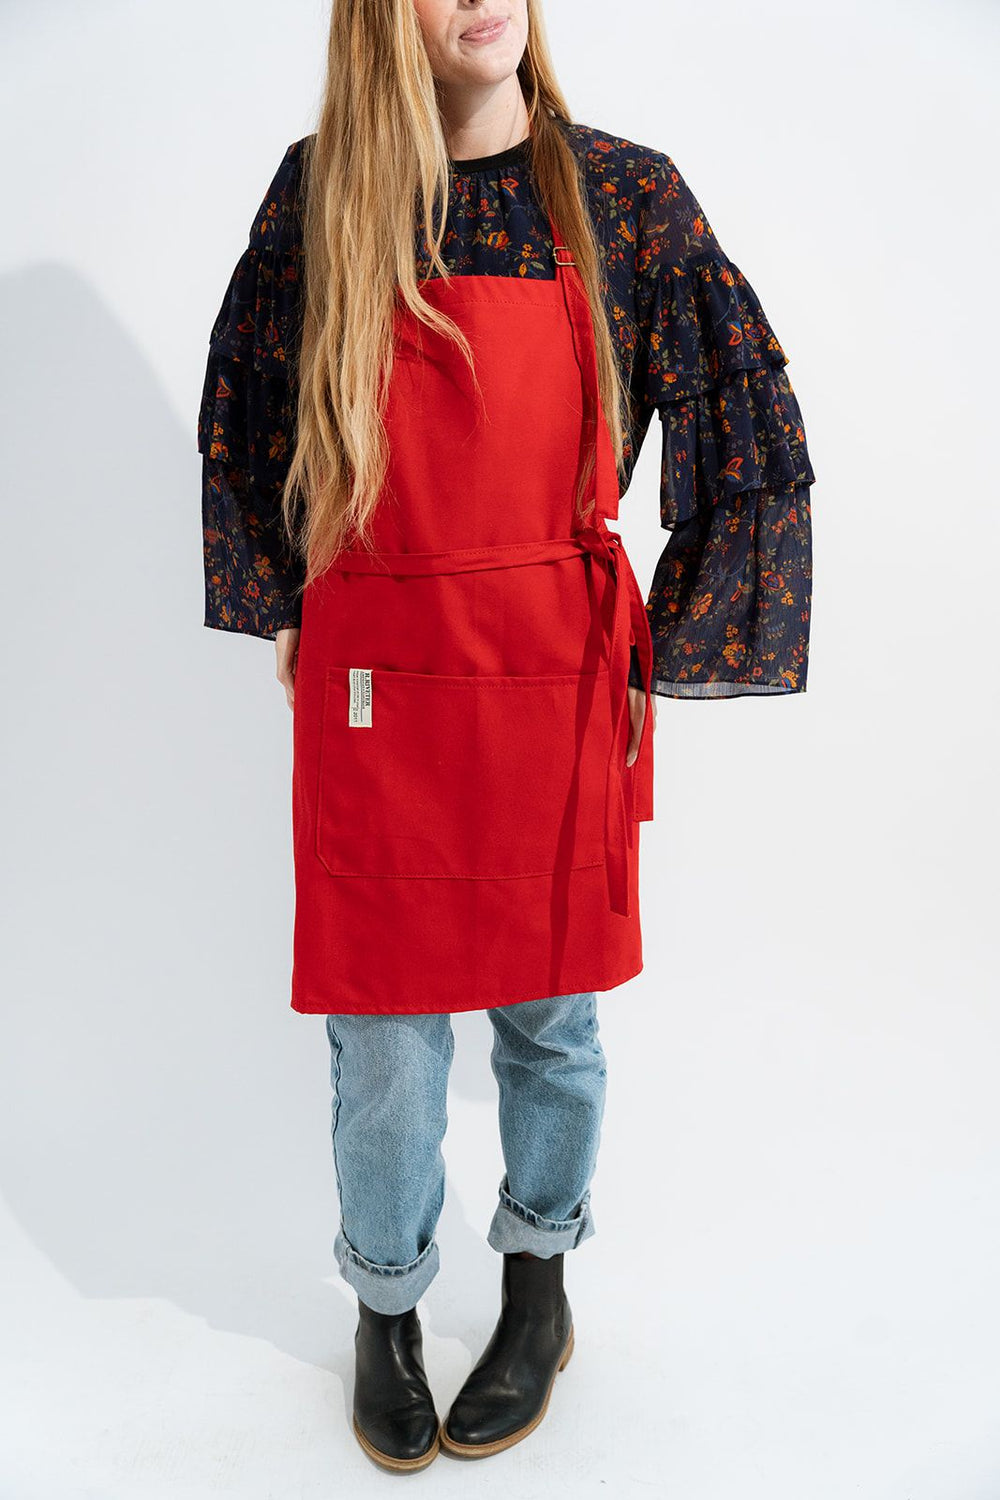 Riveter Made Apron | Victory Red